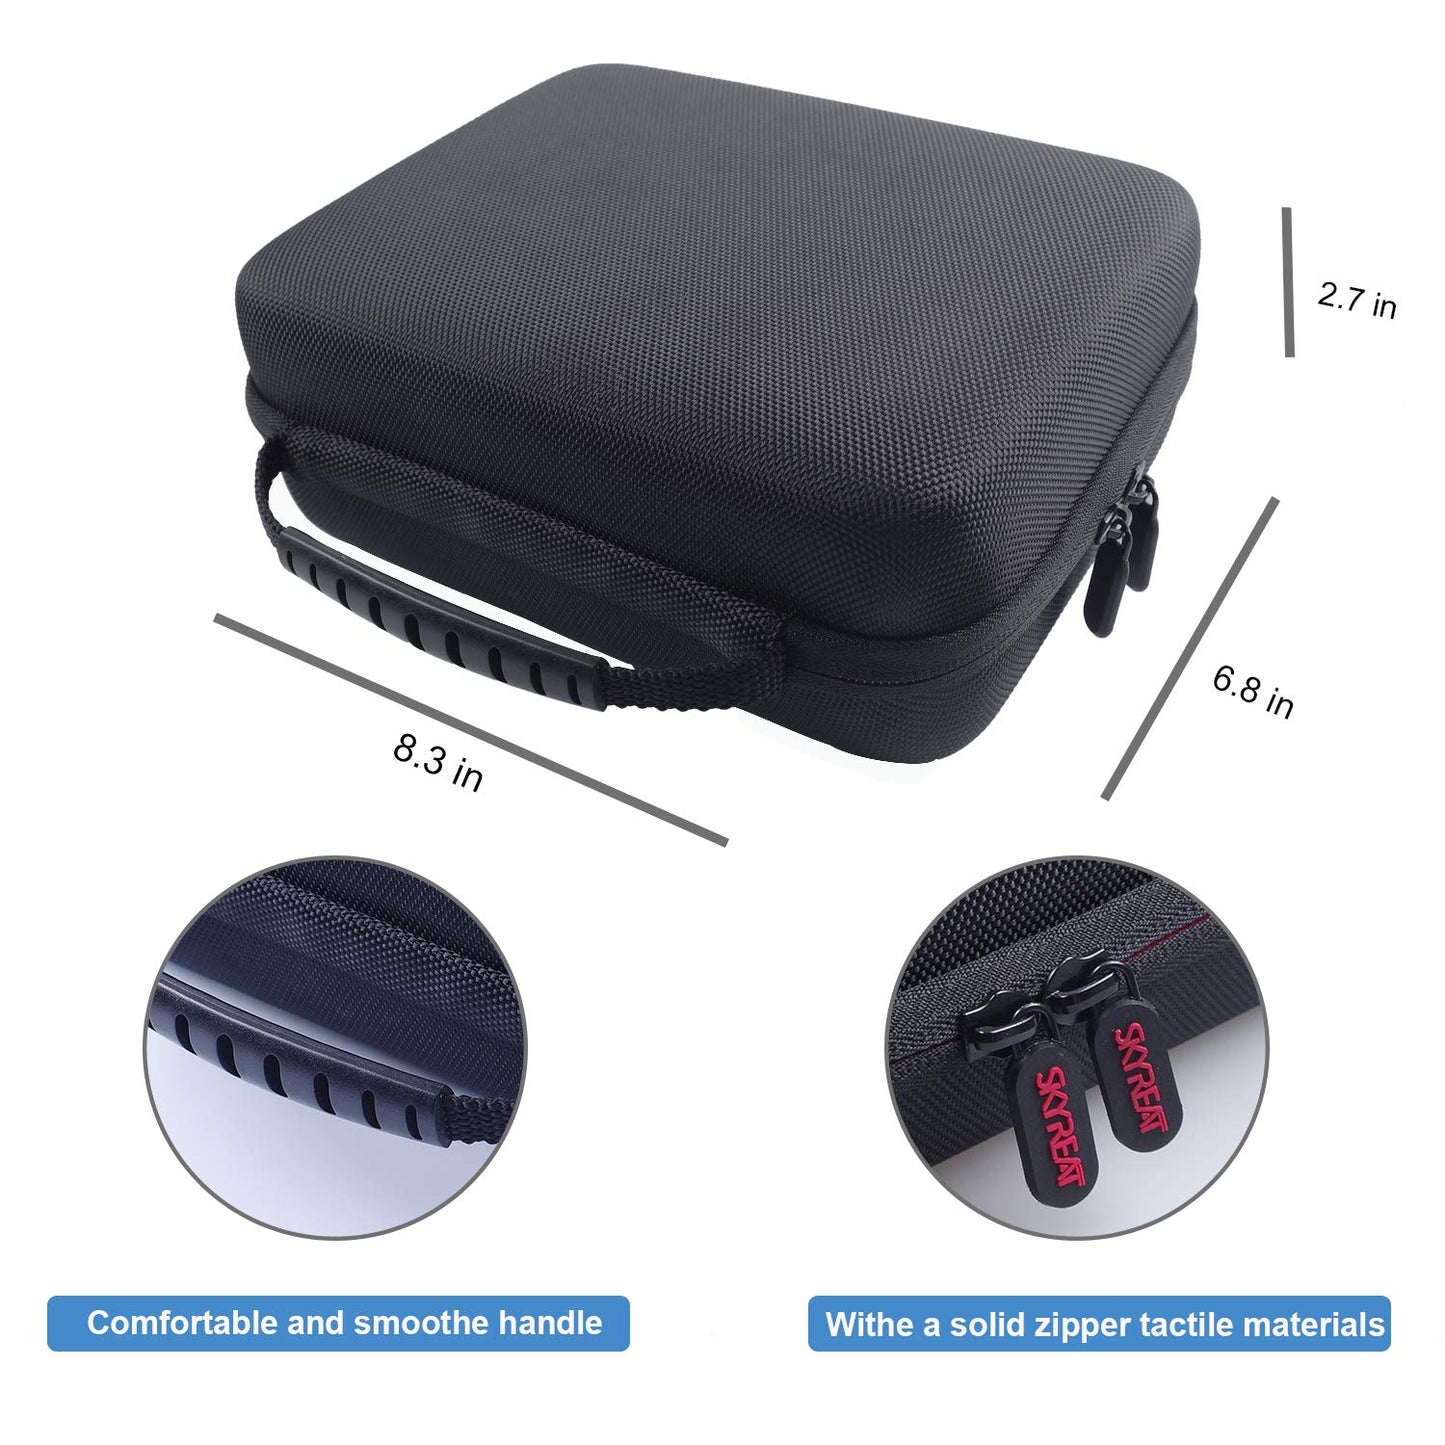 Skyreat Portable Hard Carrying Case Compatible with DJI Mavic Mini / Mini SE, Fit for Remote Controller & Batteries and Other Accessories